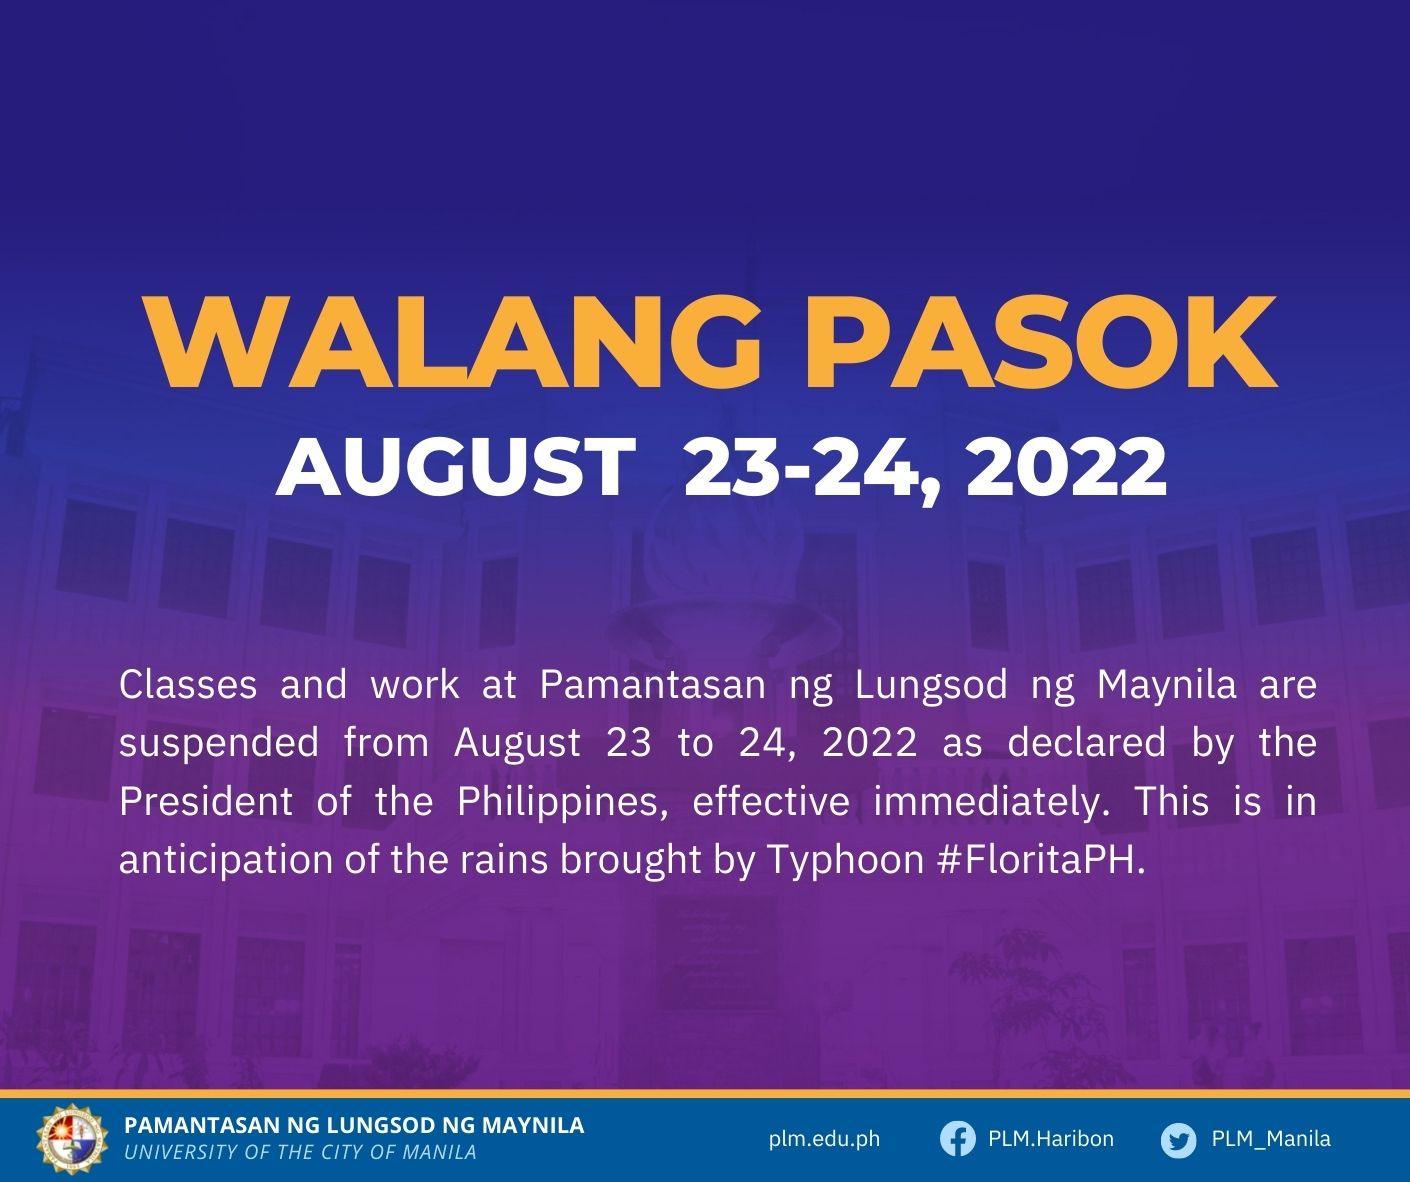 Classes, work suspended from August 23-24, 2022